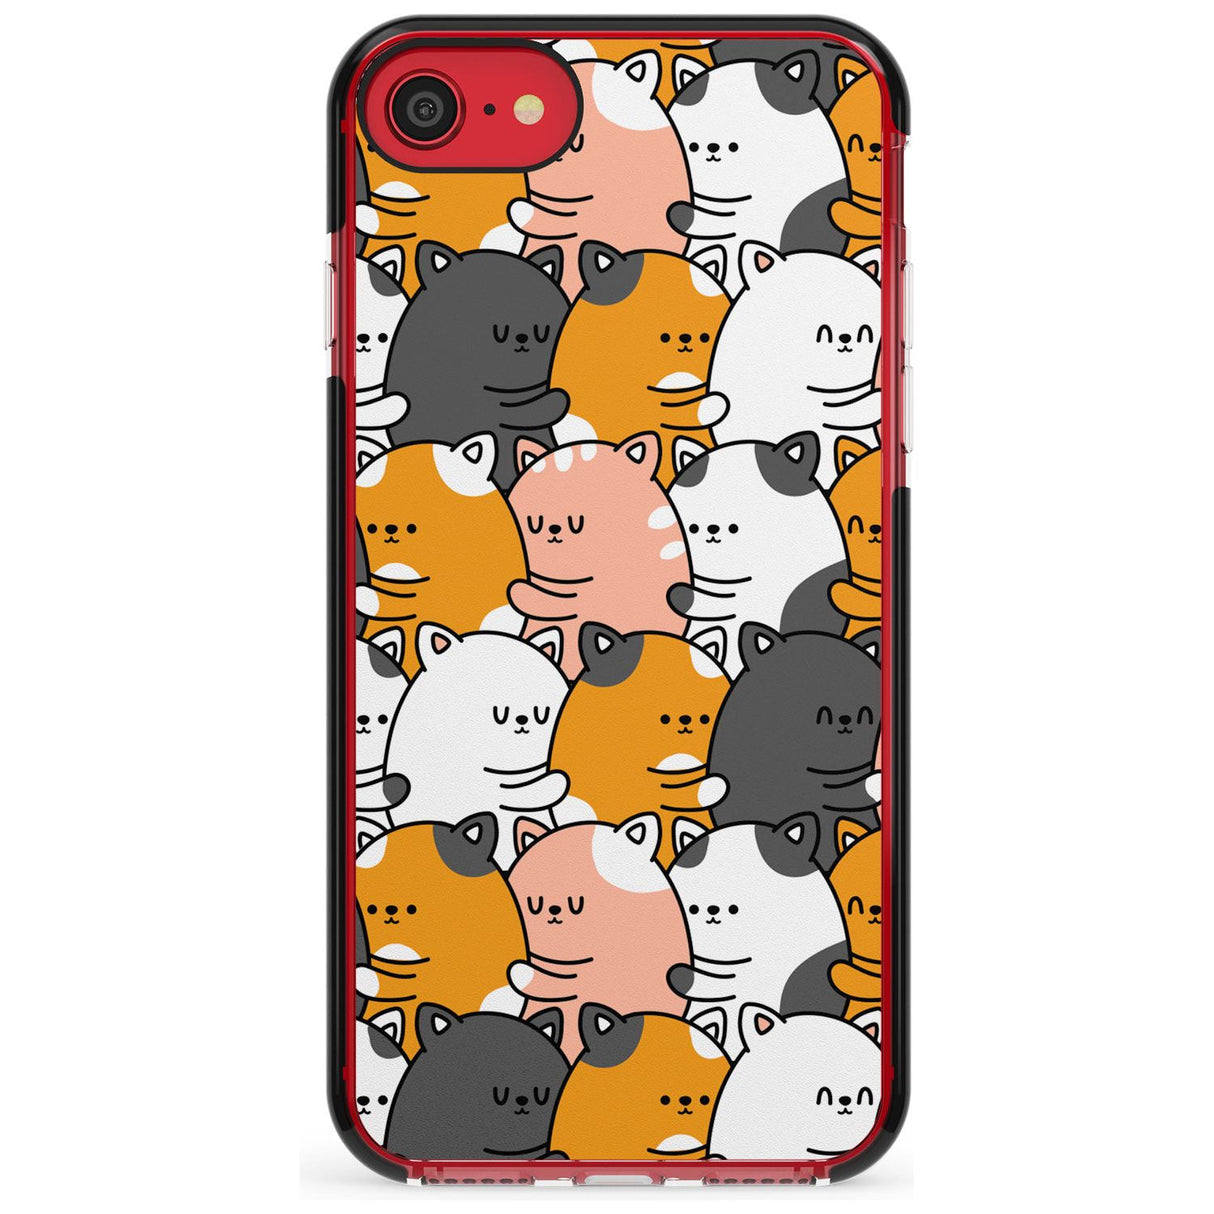 Spooning Cats Kawaii Pattern Black Impact Phone Case for iPhone SE 8 7 Plus